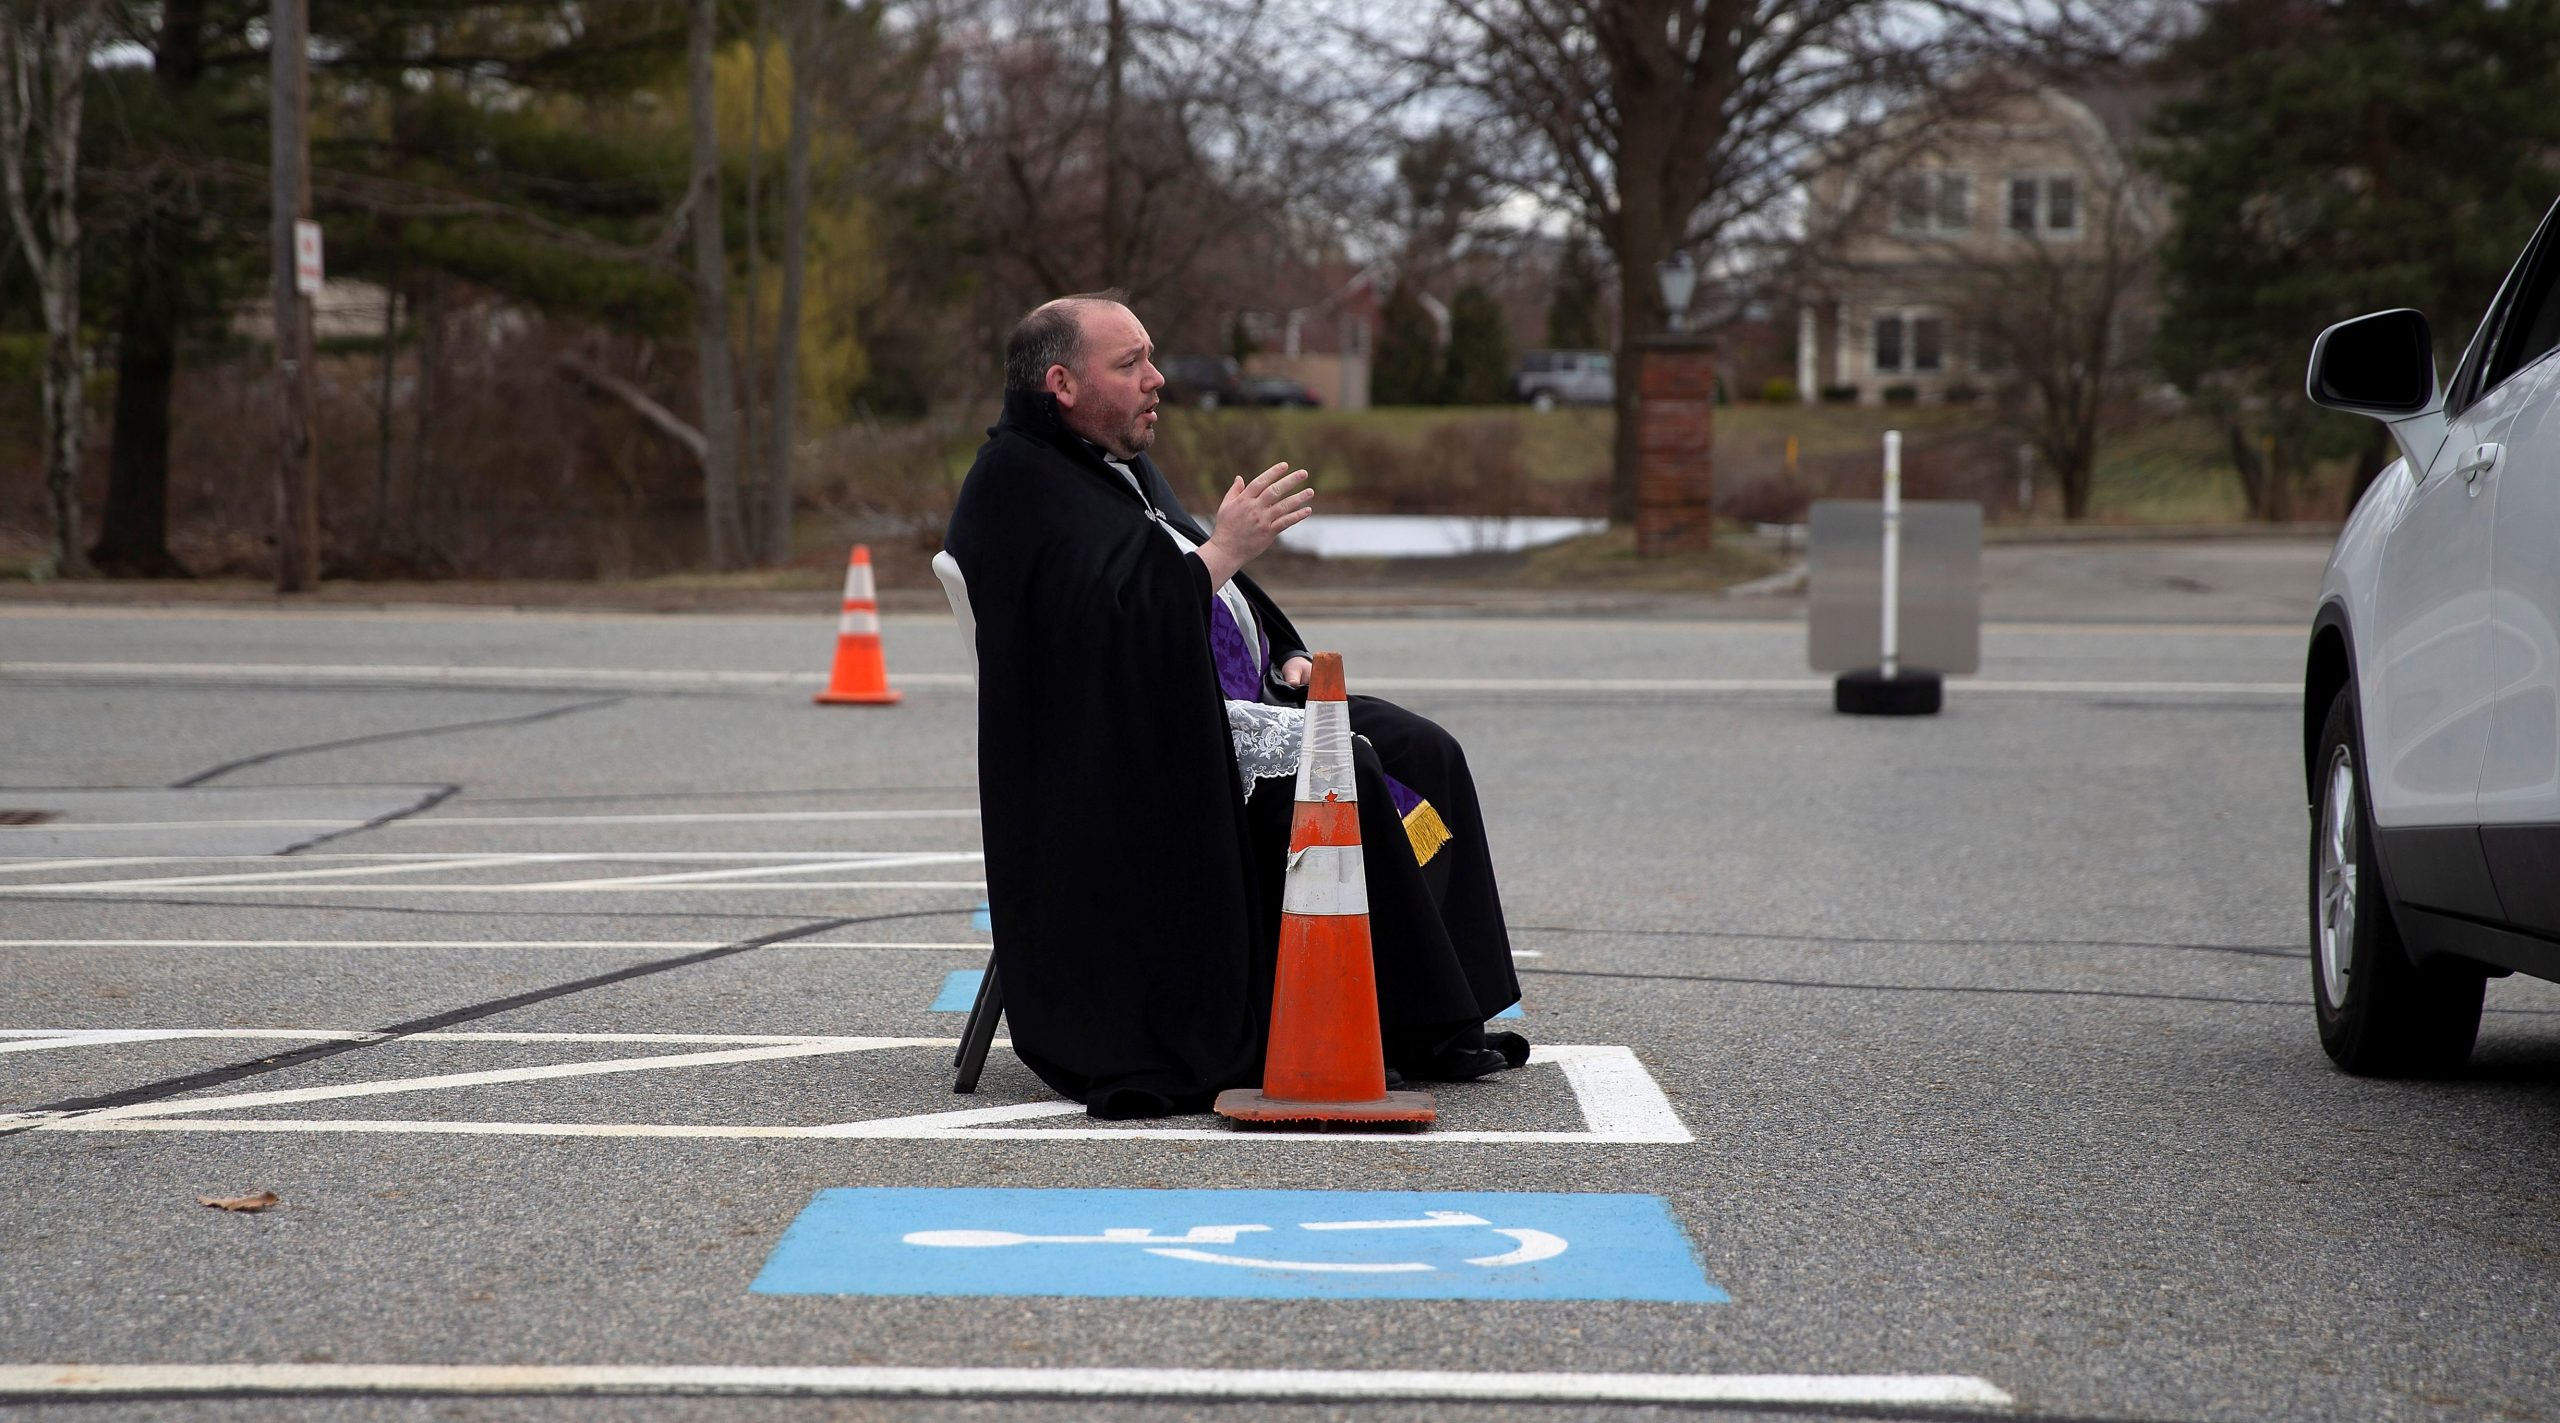 epa08337716 Father Corey Bassett-Tirrell hears a parishioner's confession in the parking lot of St Mary's Church in Chelmsford, Massachusetts, USA, 01 April 2020. Weather dependent, confessions will be heard in the parking lot on Wednesday's from 4 to 6pm until the closure on the Church due to the pandemic is lifted. Countries around the world have closed borders, schools as well as public facilities, and have cancelled most major sports and entertainment events in order to stem the spread of the SARS-CoV-2 coronavirus causing the Covid-19 disease.  EPA/CJ GUNTHER